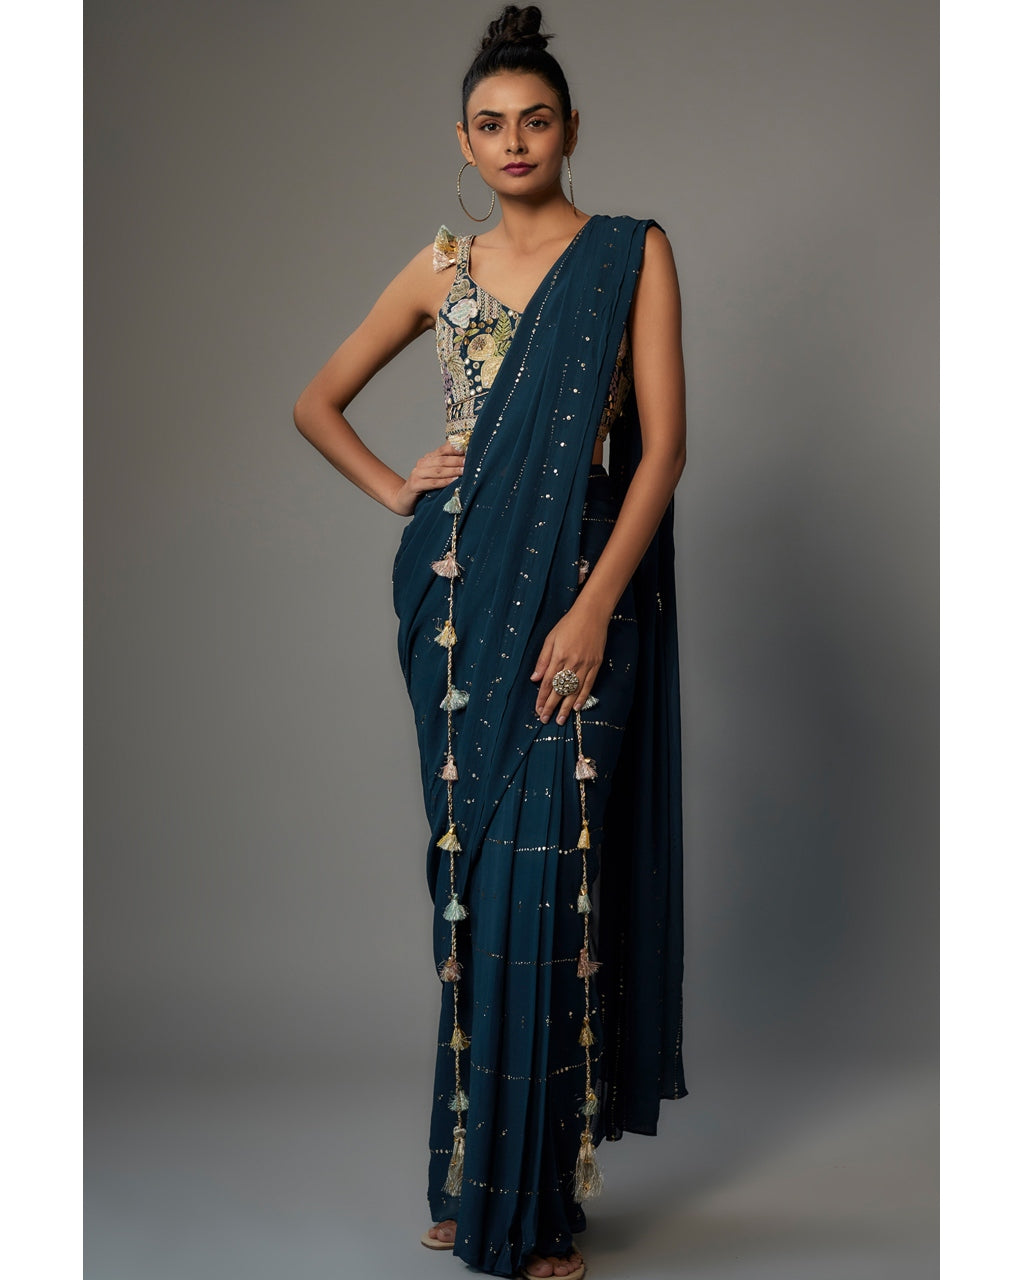 Teal Blue Embroidered Choli With Pre-Stitched Sari Set